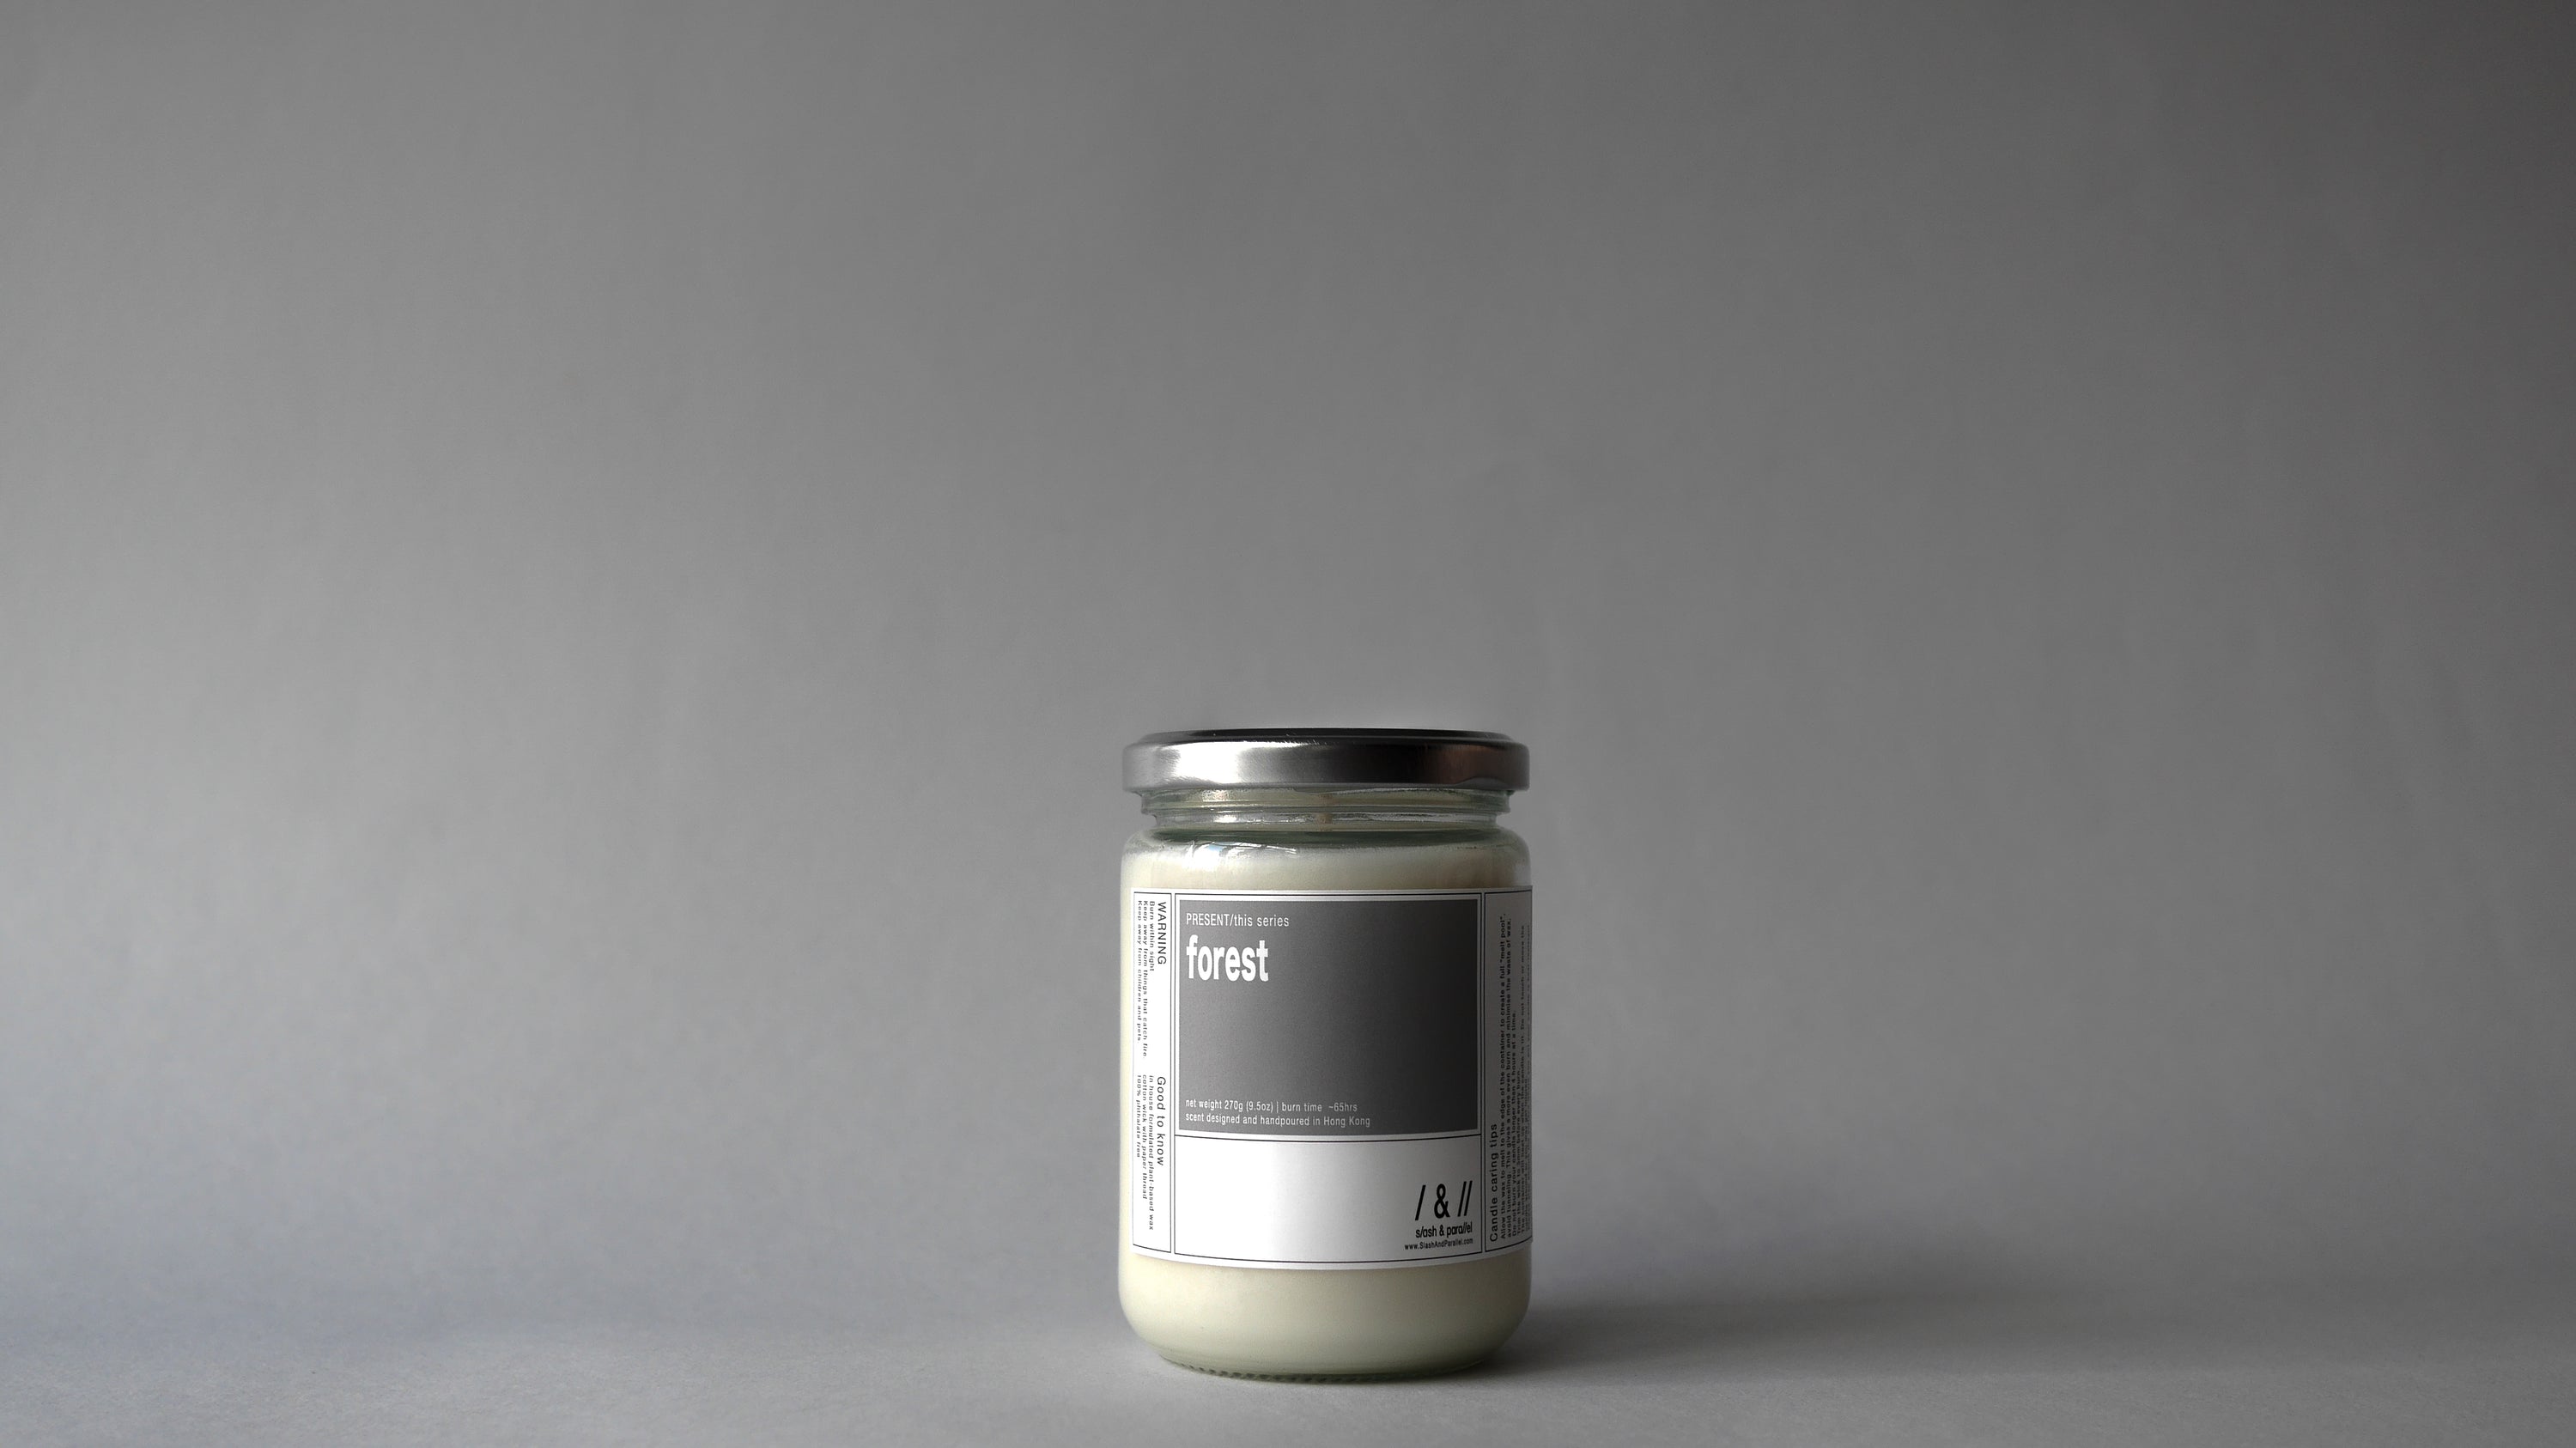 forest / scented candle 270g // this series